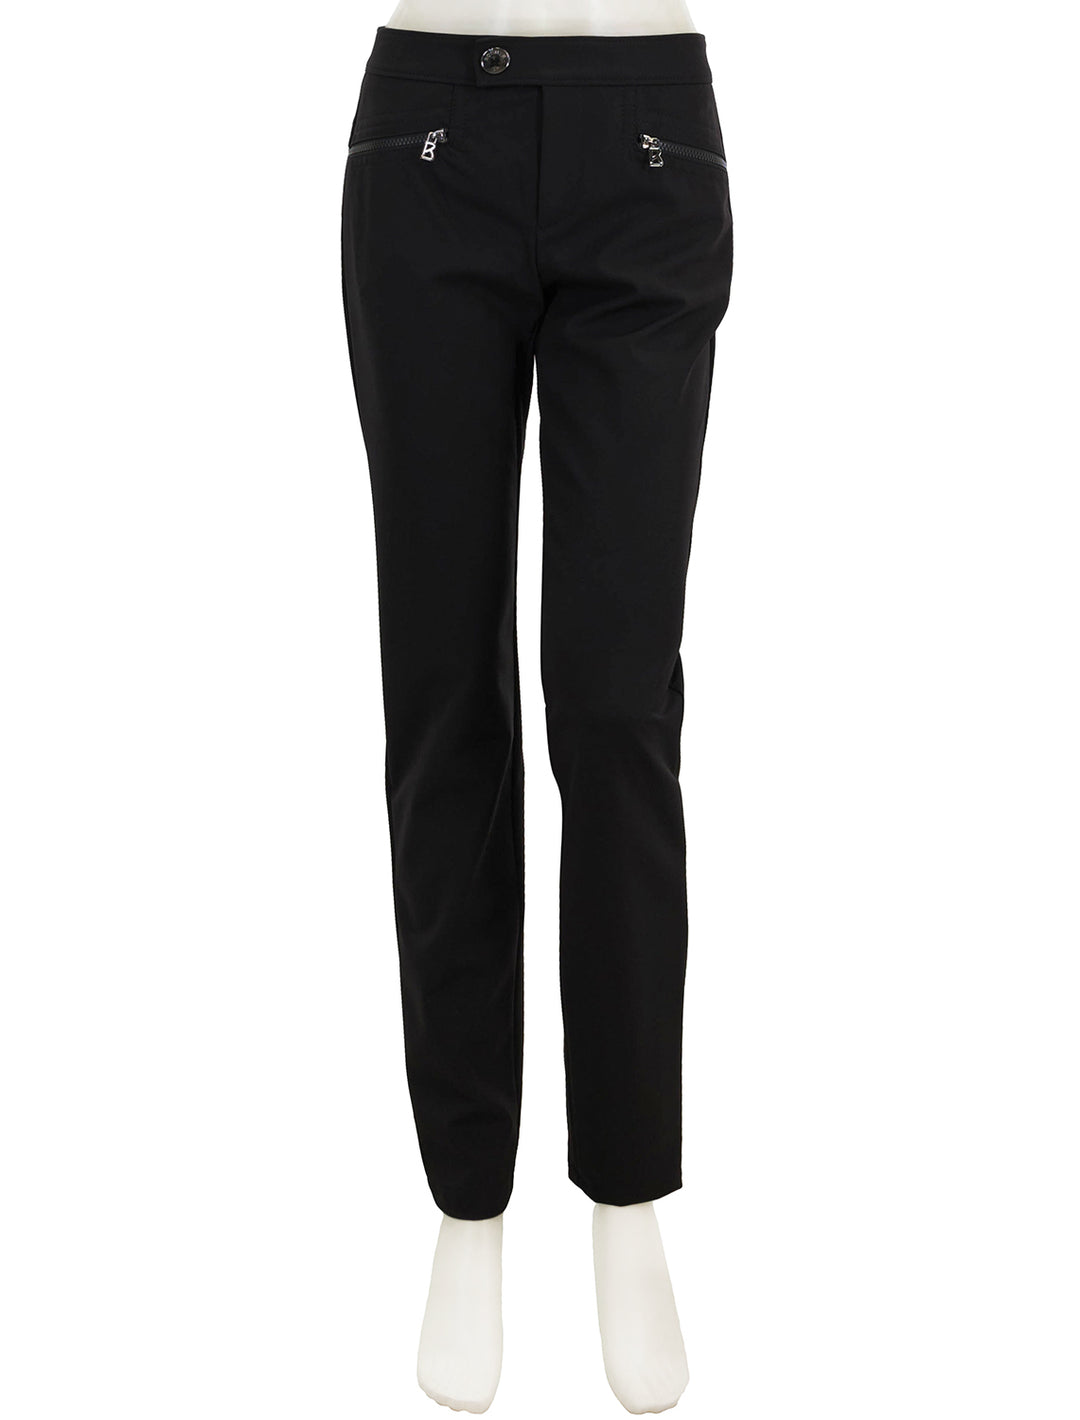 Front view of Bogner's lindy pant in black.